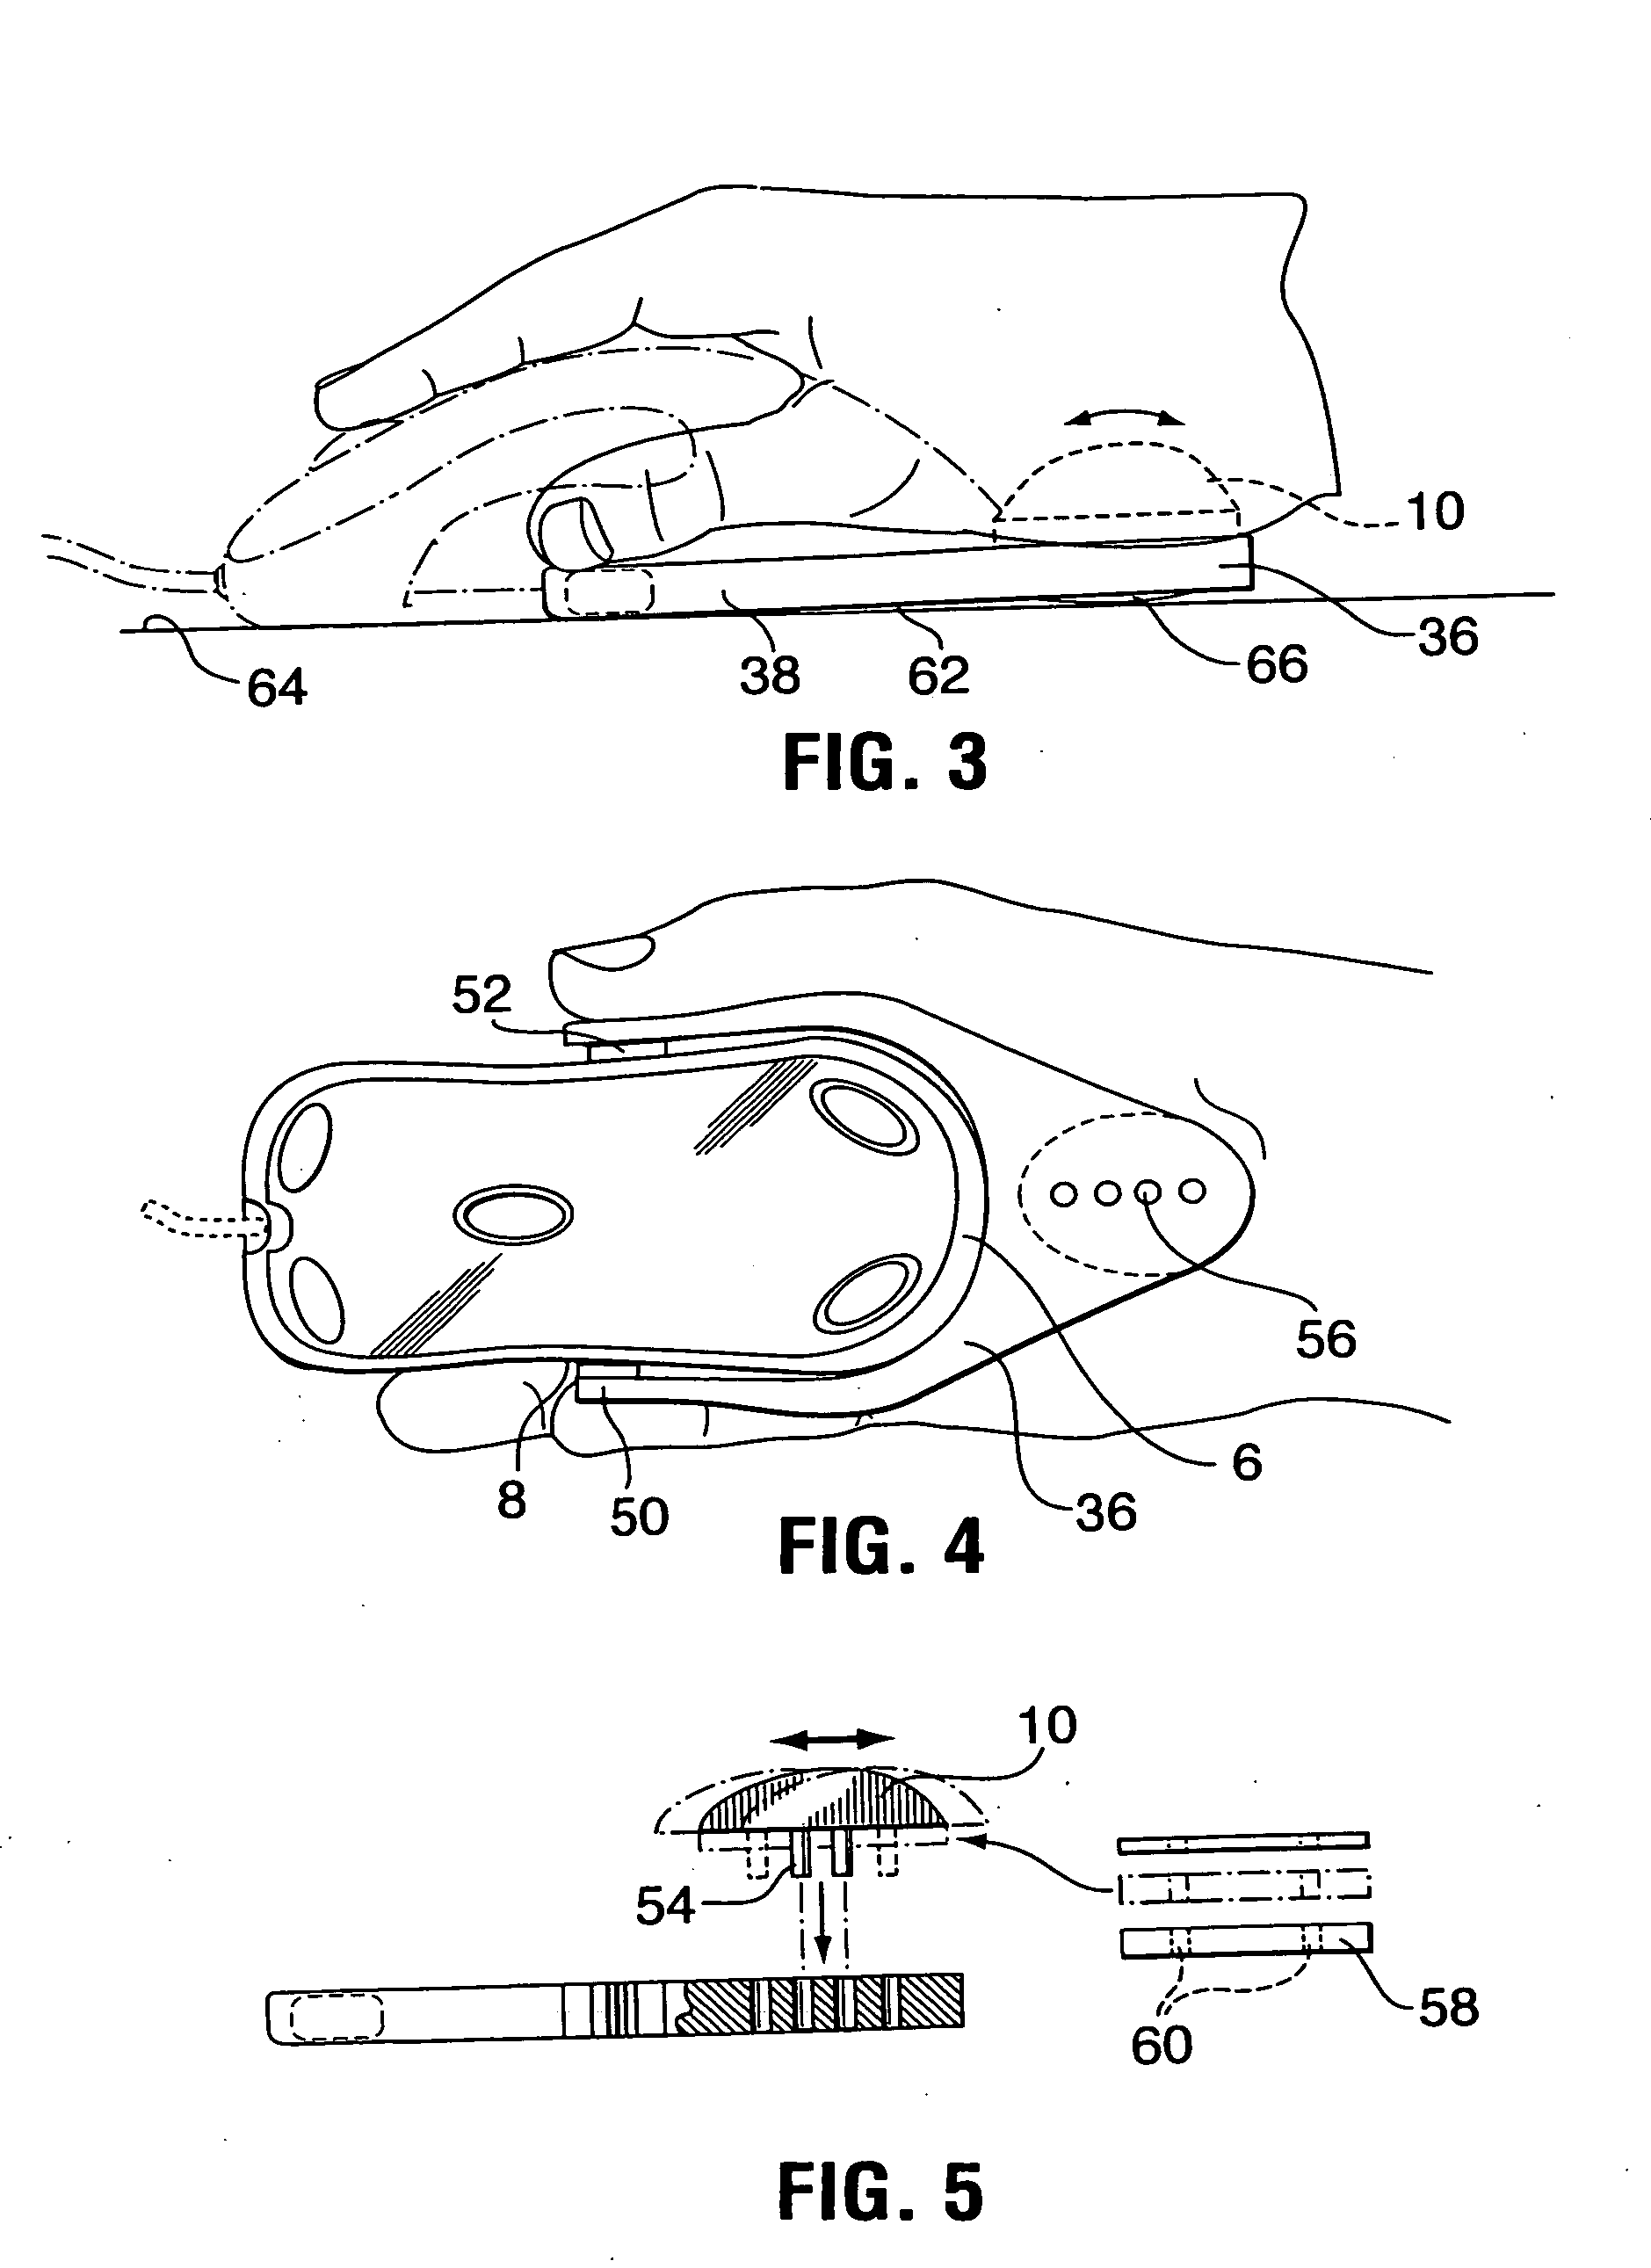 Adjustable hand positioner for computer mouse